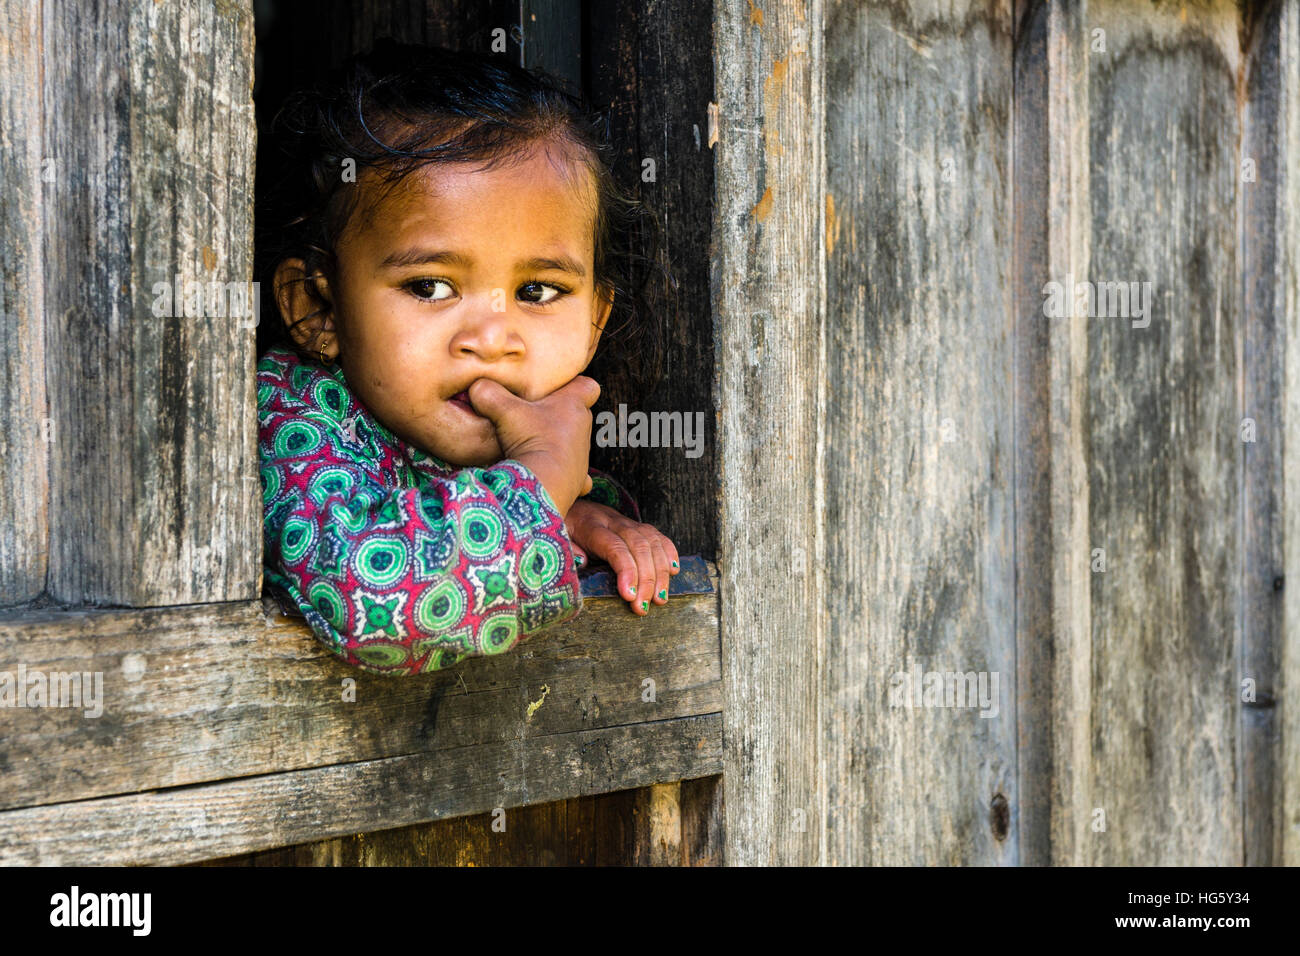 Portrait of a little girl, Upper Marsyangdi valley, looking out of a window, Bagarchap, Manang District, Nepal Stock Photo